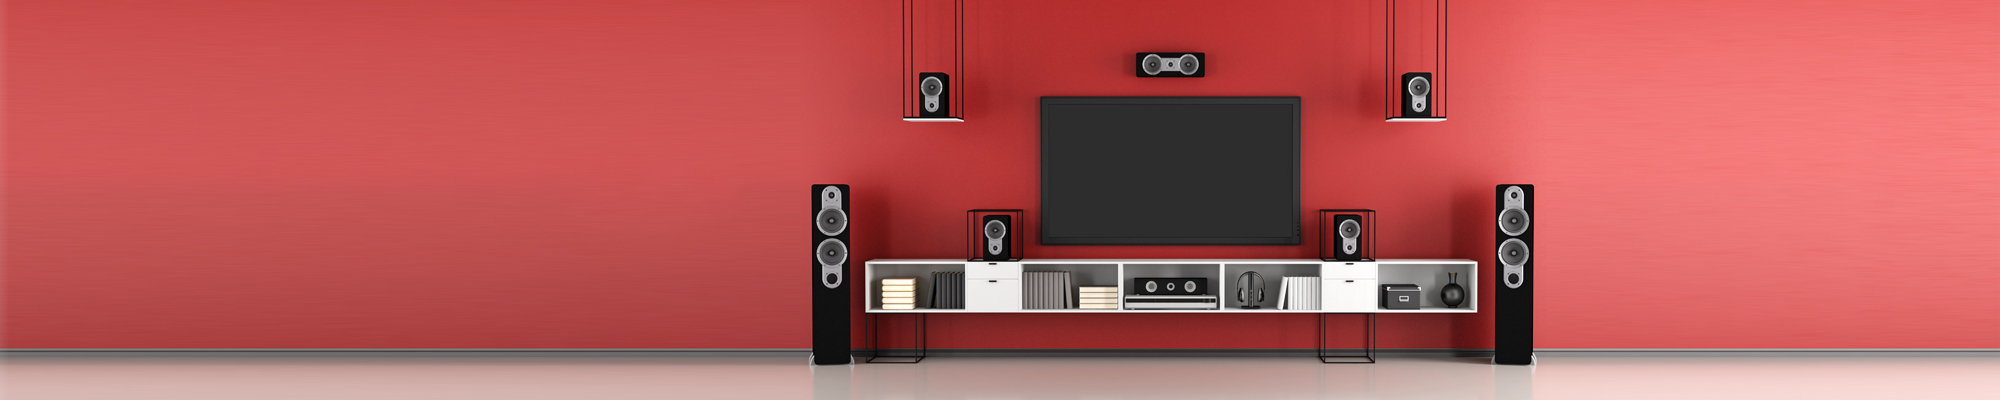 5 Reasons Your Home Theater Sound Is Bad (And How To Fix Them)